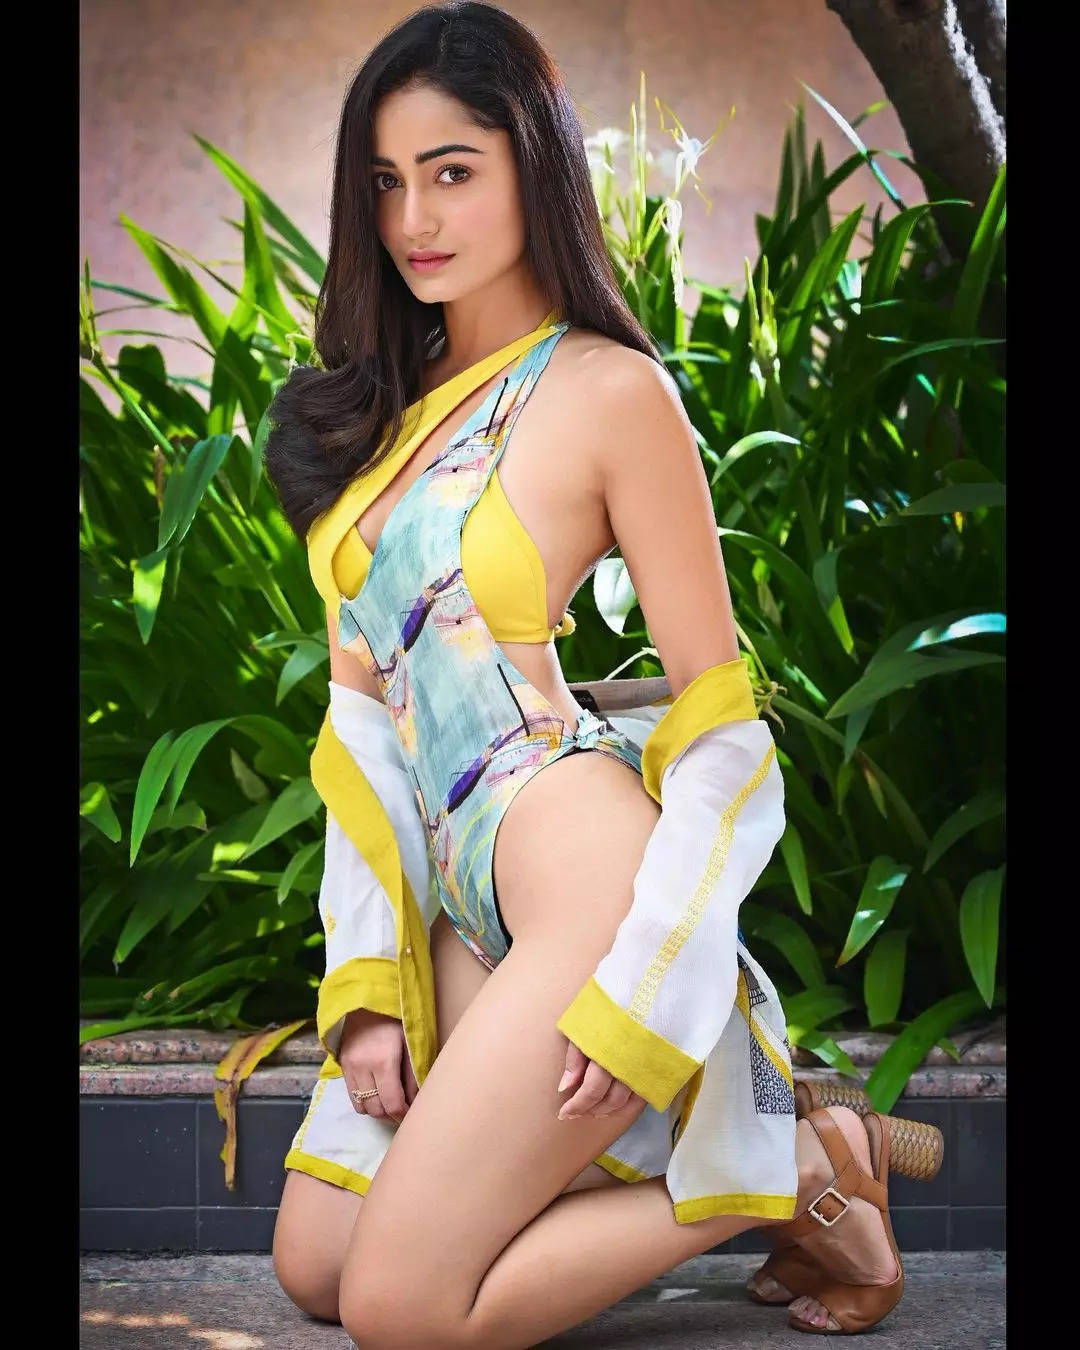 Tridha Choudhury hot photos: The Aashram actress takes the internet by  storm with her bold and glamorous looks